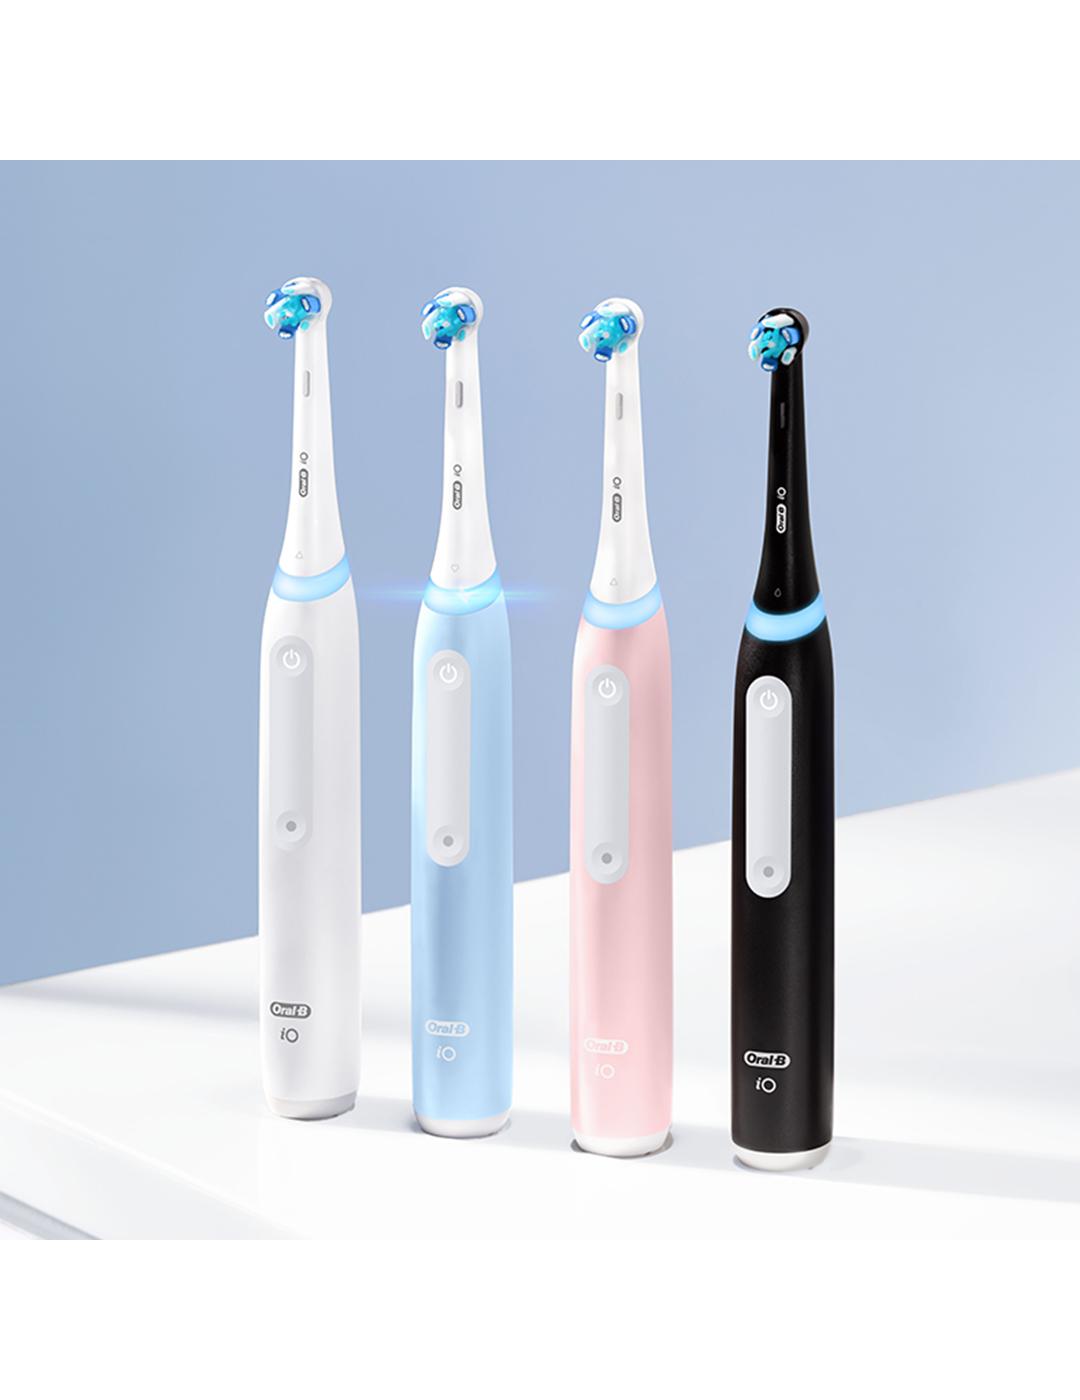 Oral-B iO Series 3 Rechargeable Toothbrush - White; image 6 of 9